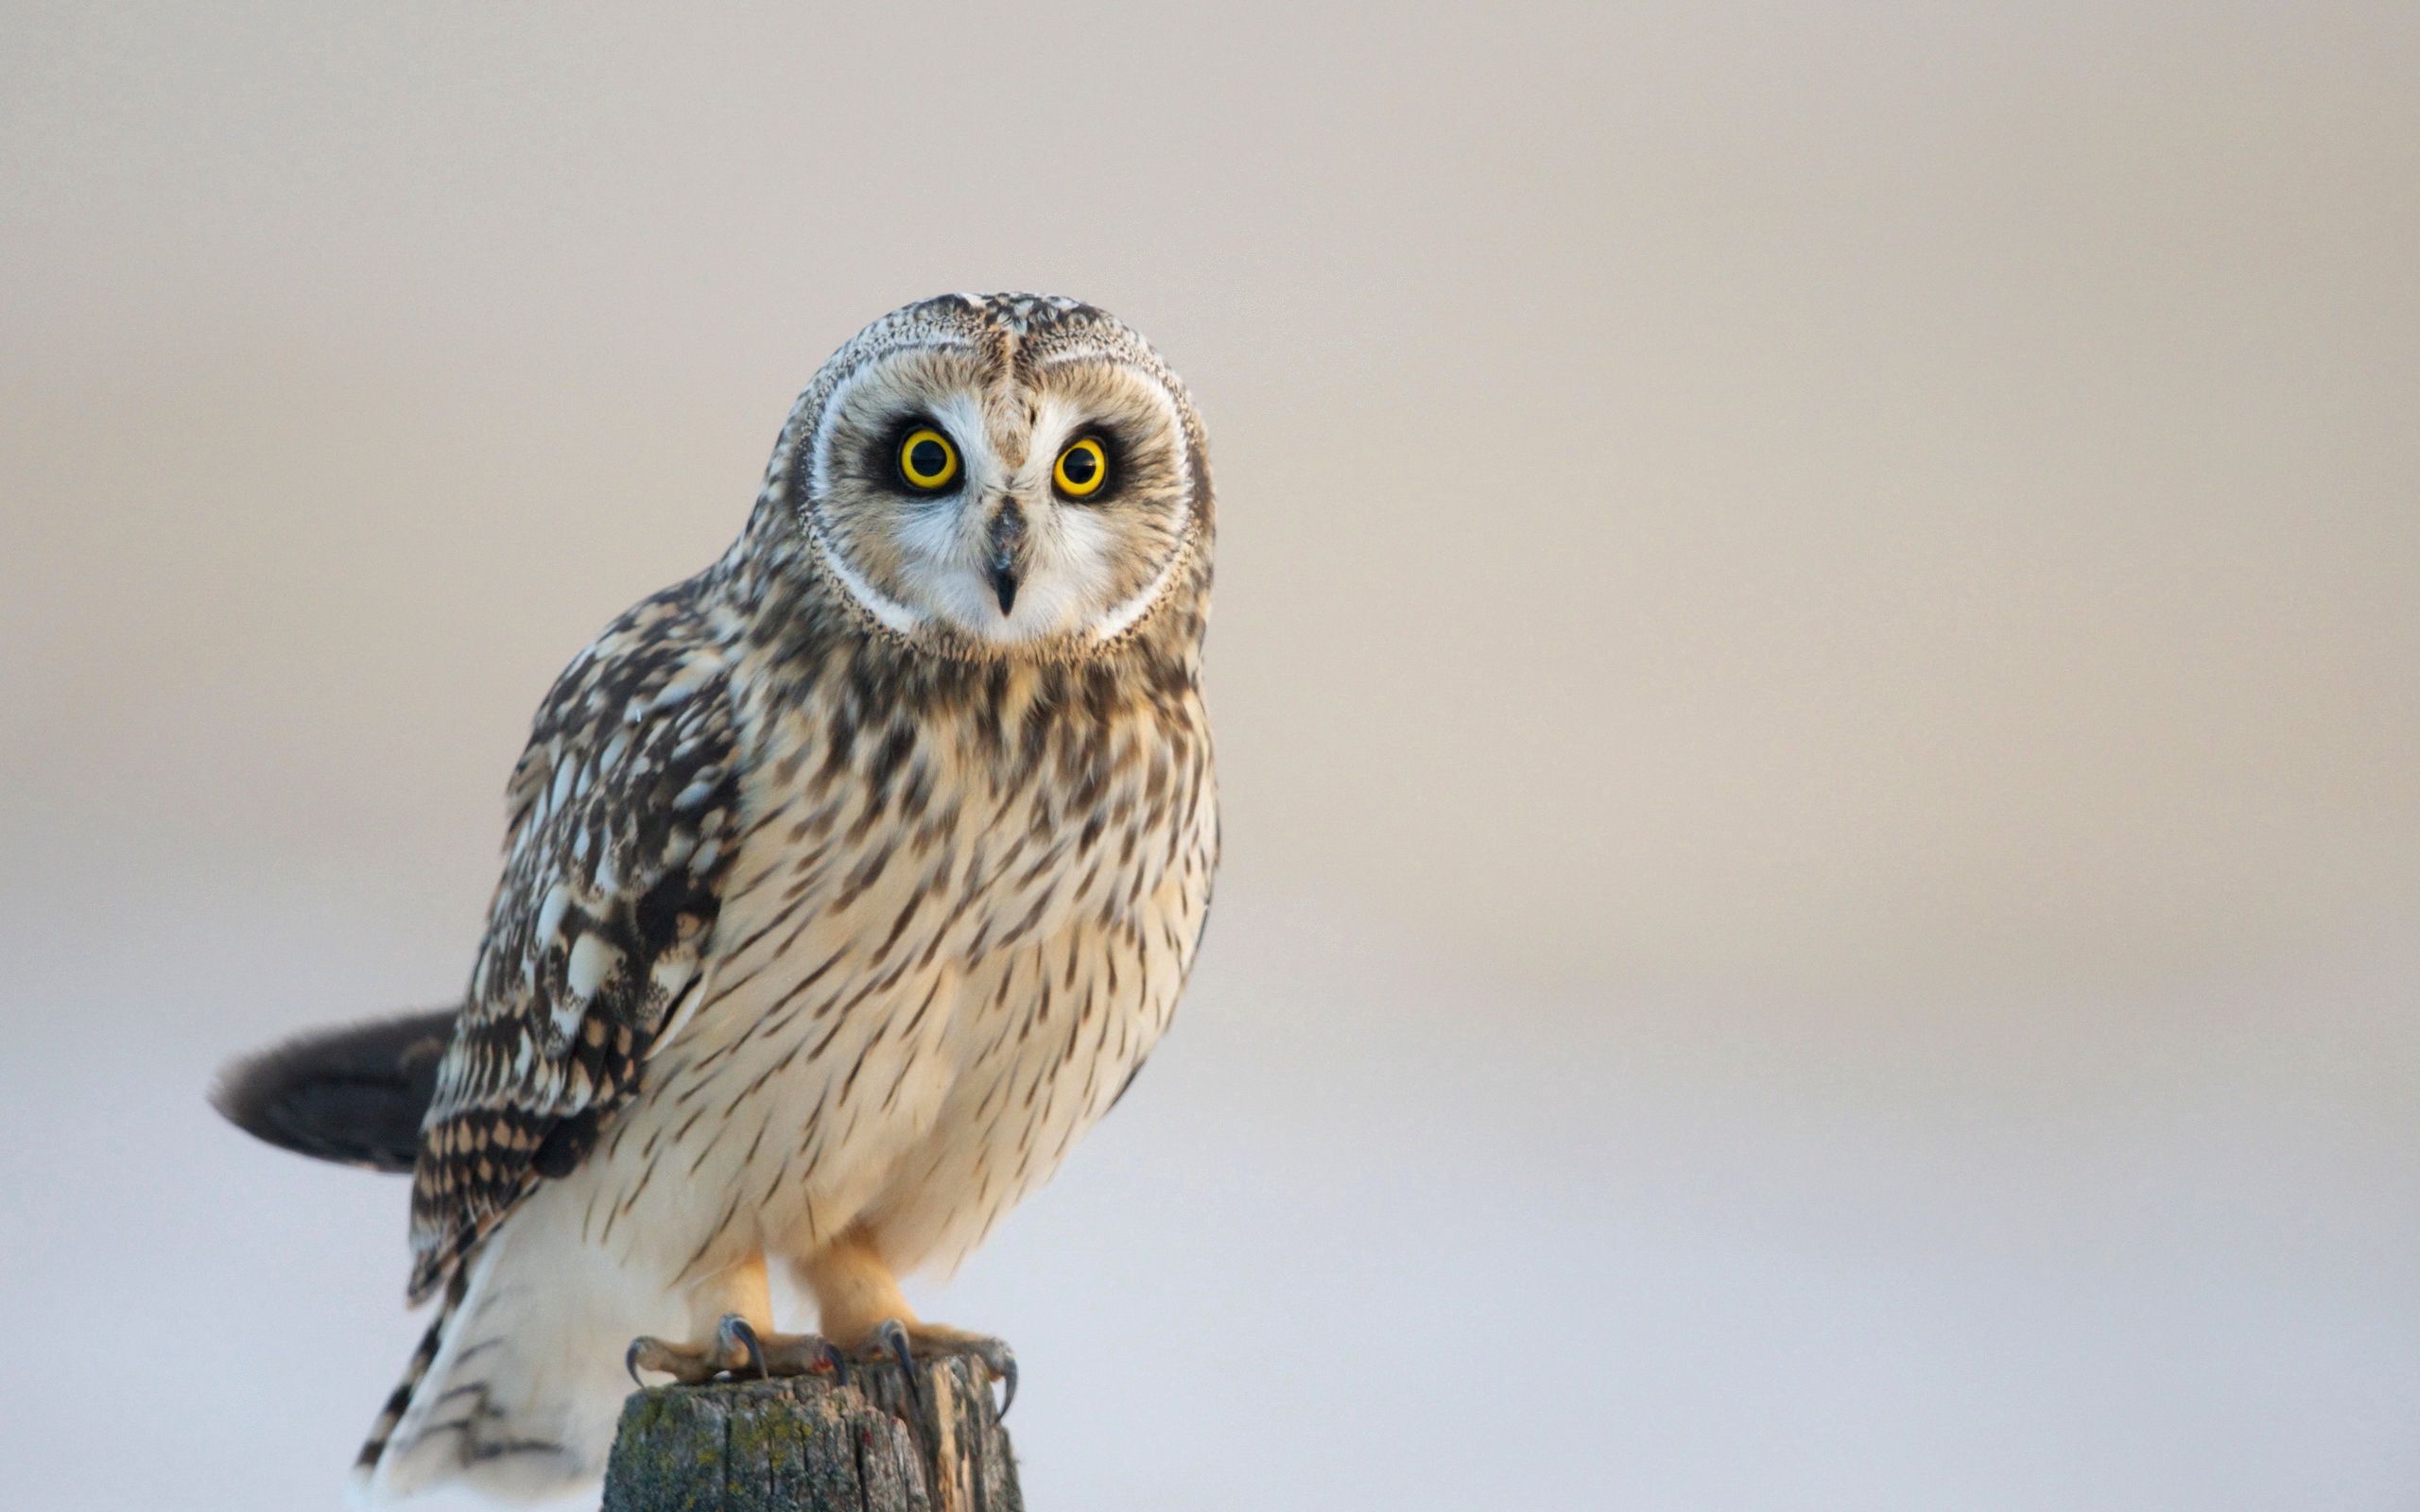 86867 download wallpaper owl, animals, bird, predator, sight, opinion screensavers and pictures for free